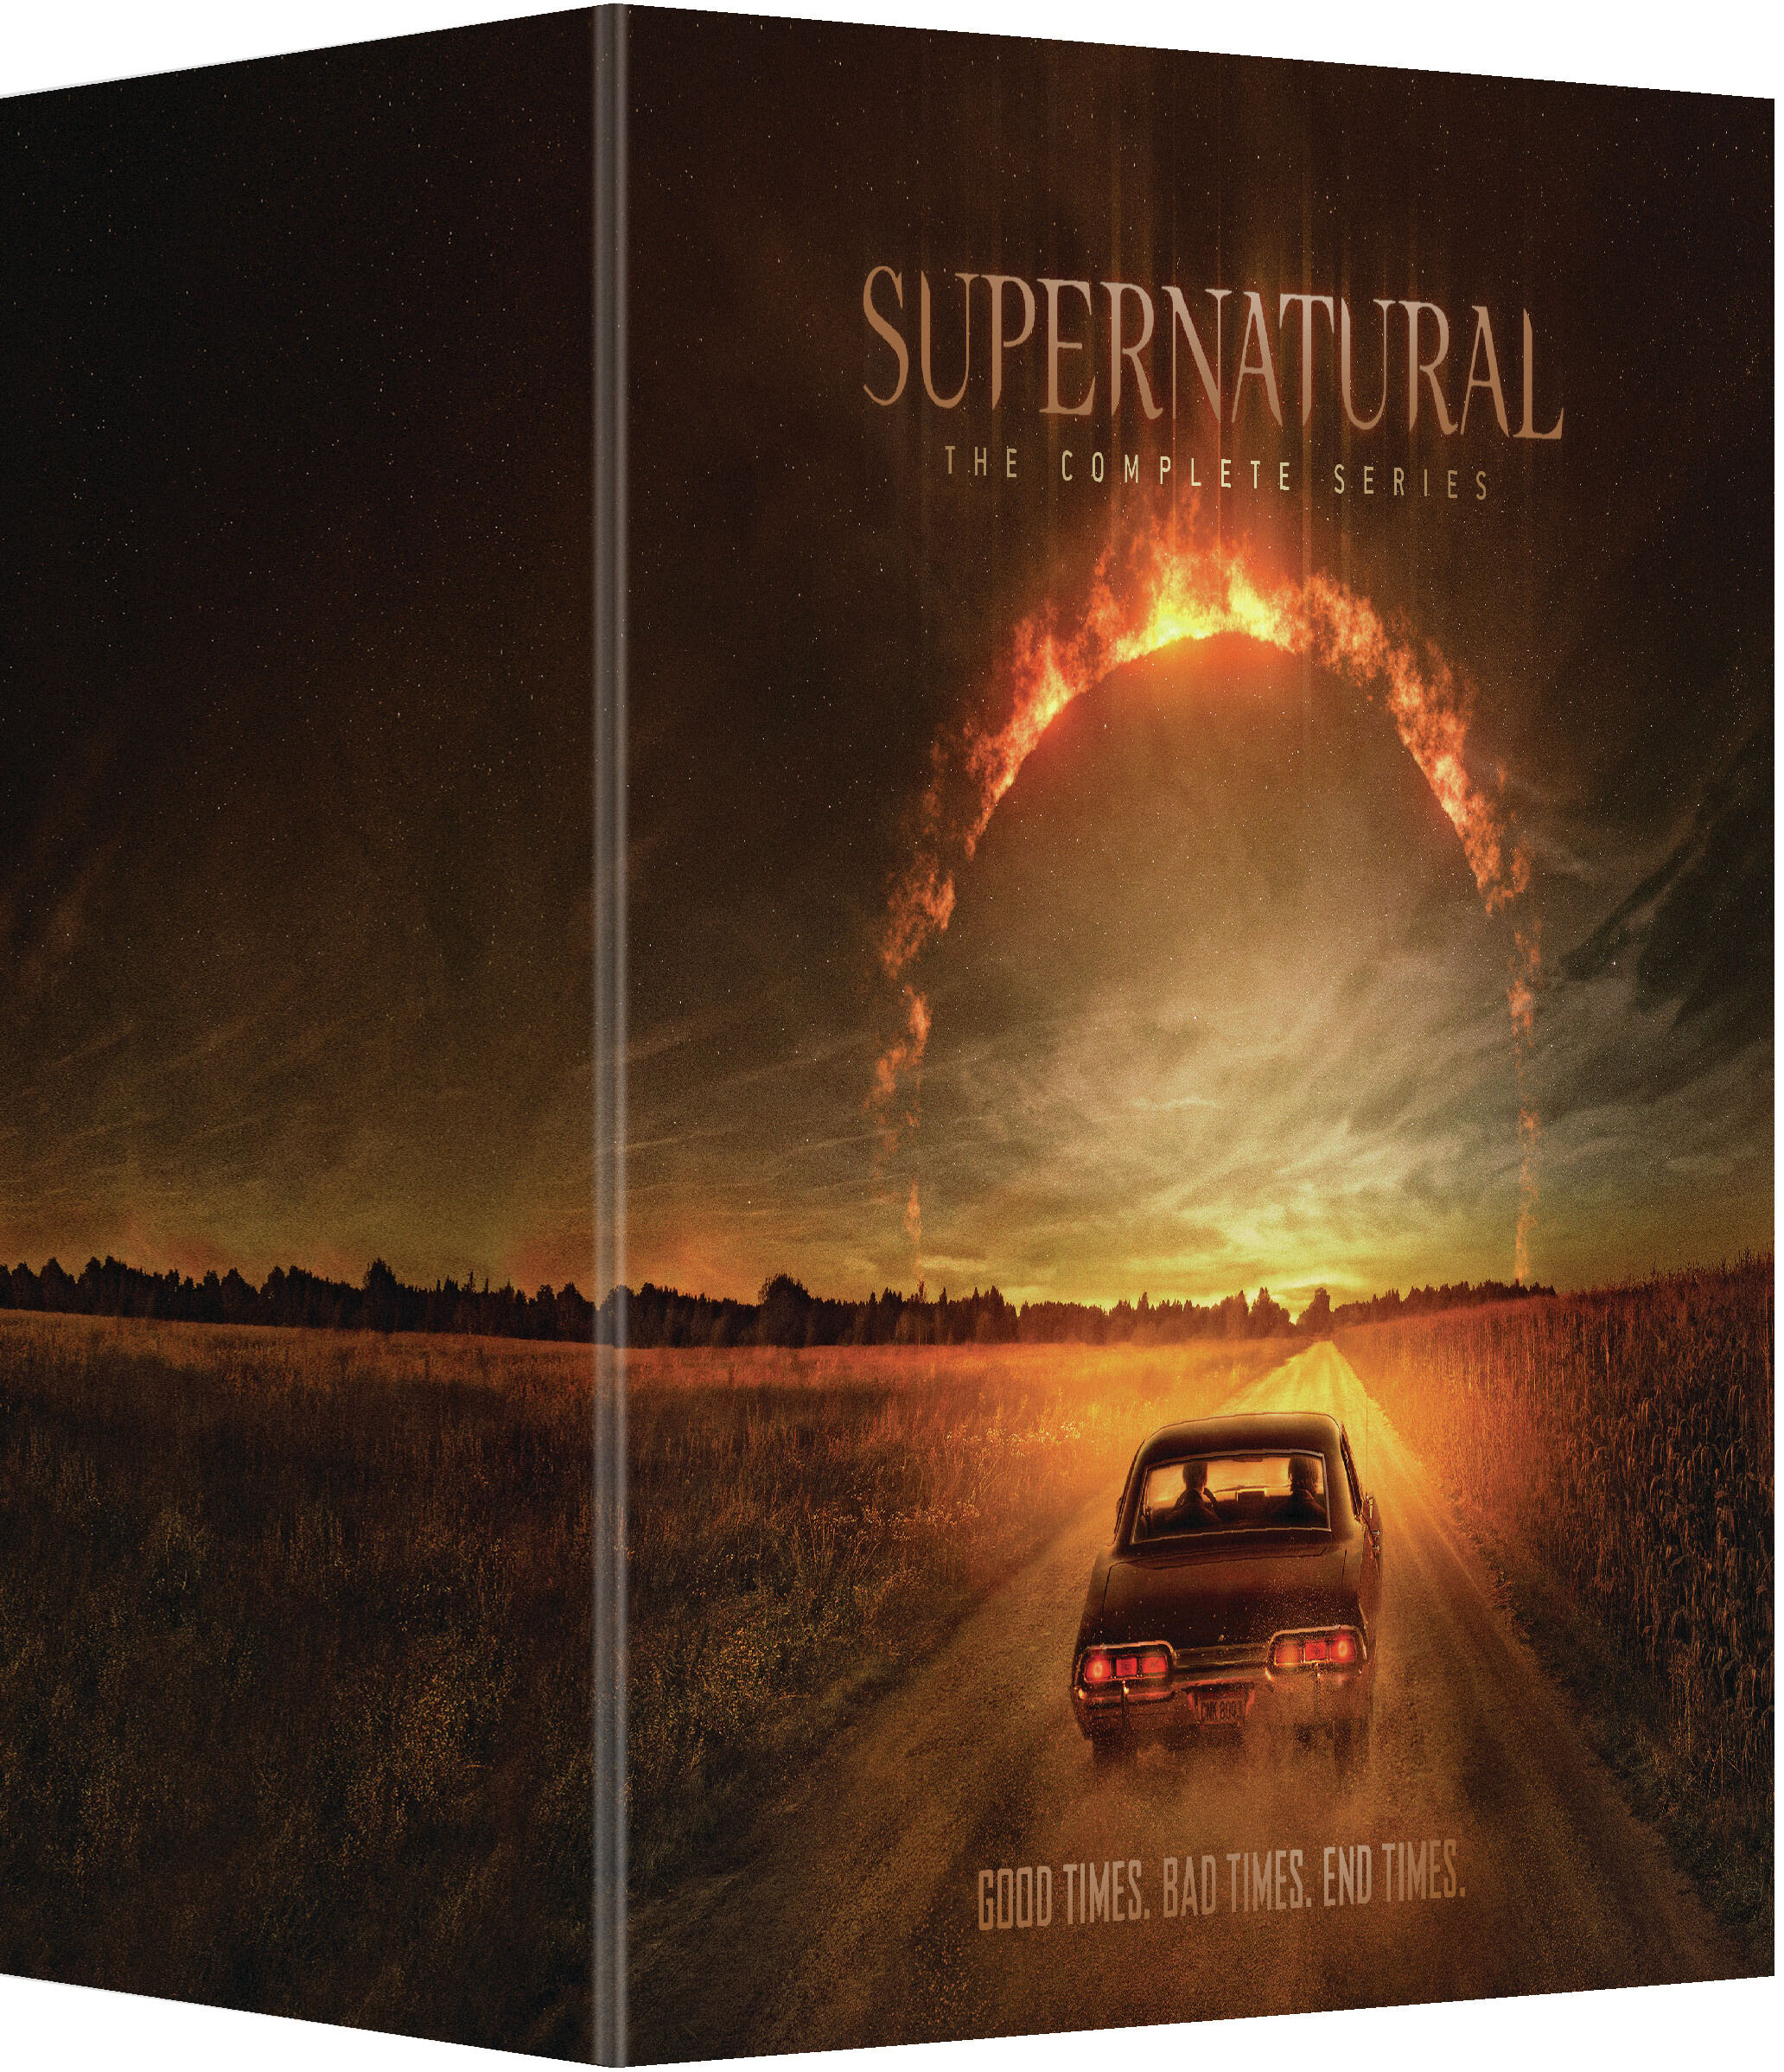 Supernatural: The Complete Series (DVD) - image 3 of 3